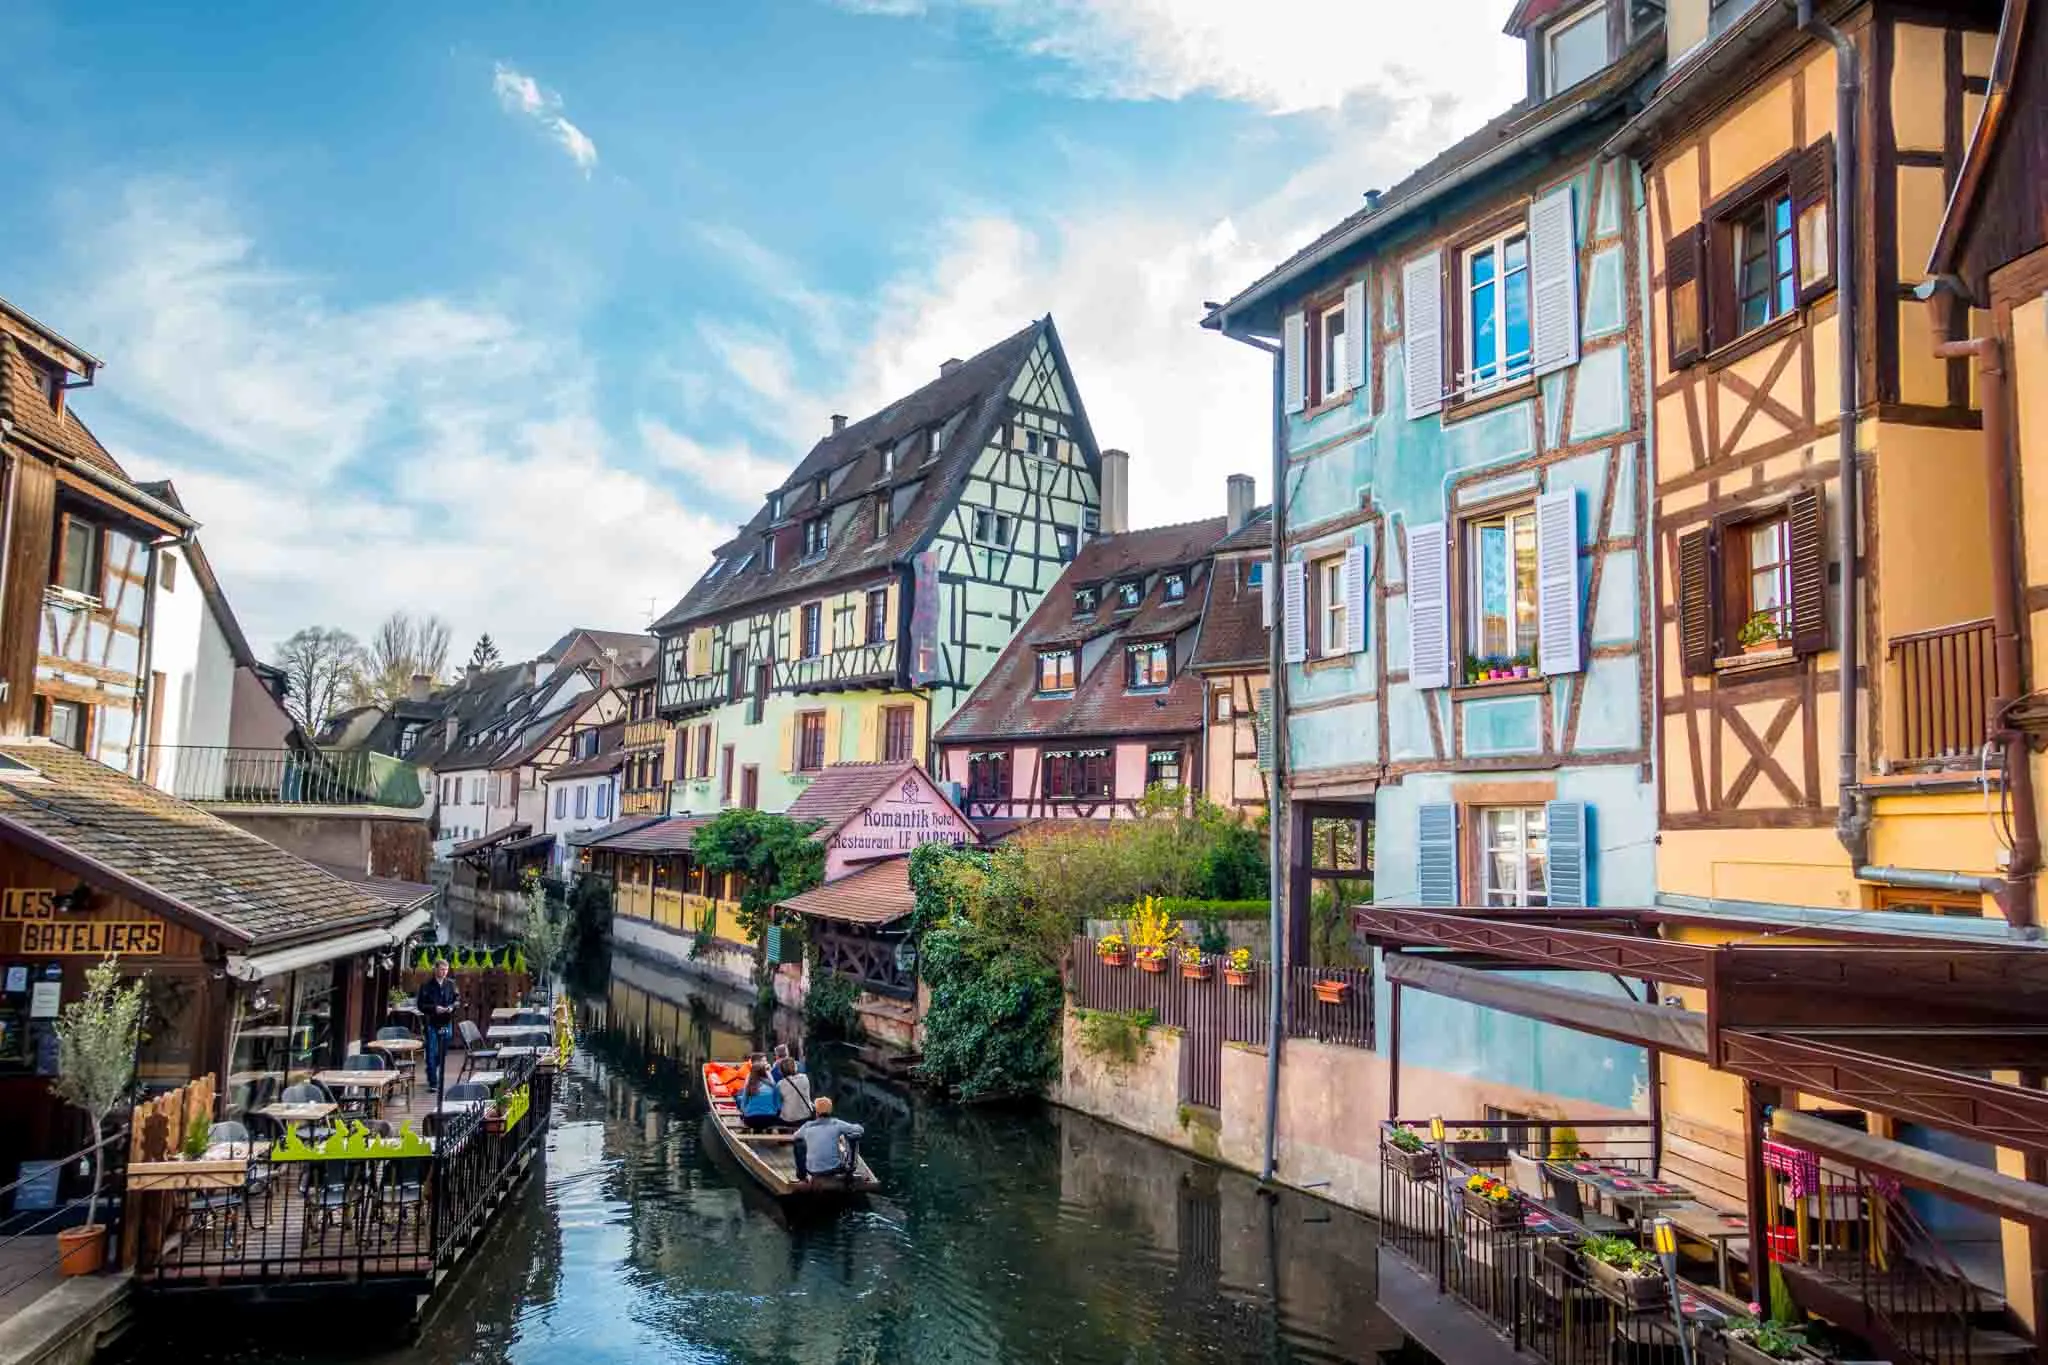 People in boat in a river passing by colorful buildings in Petite Venise in Colmar